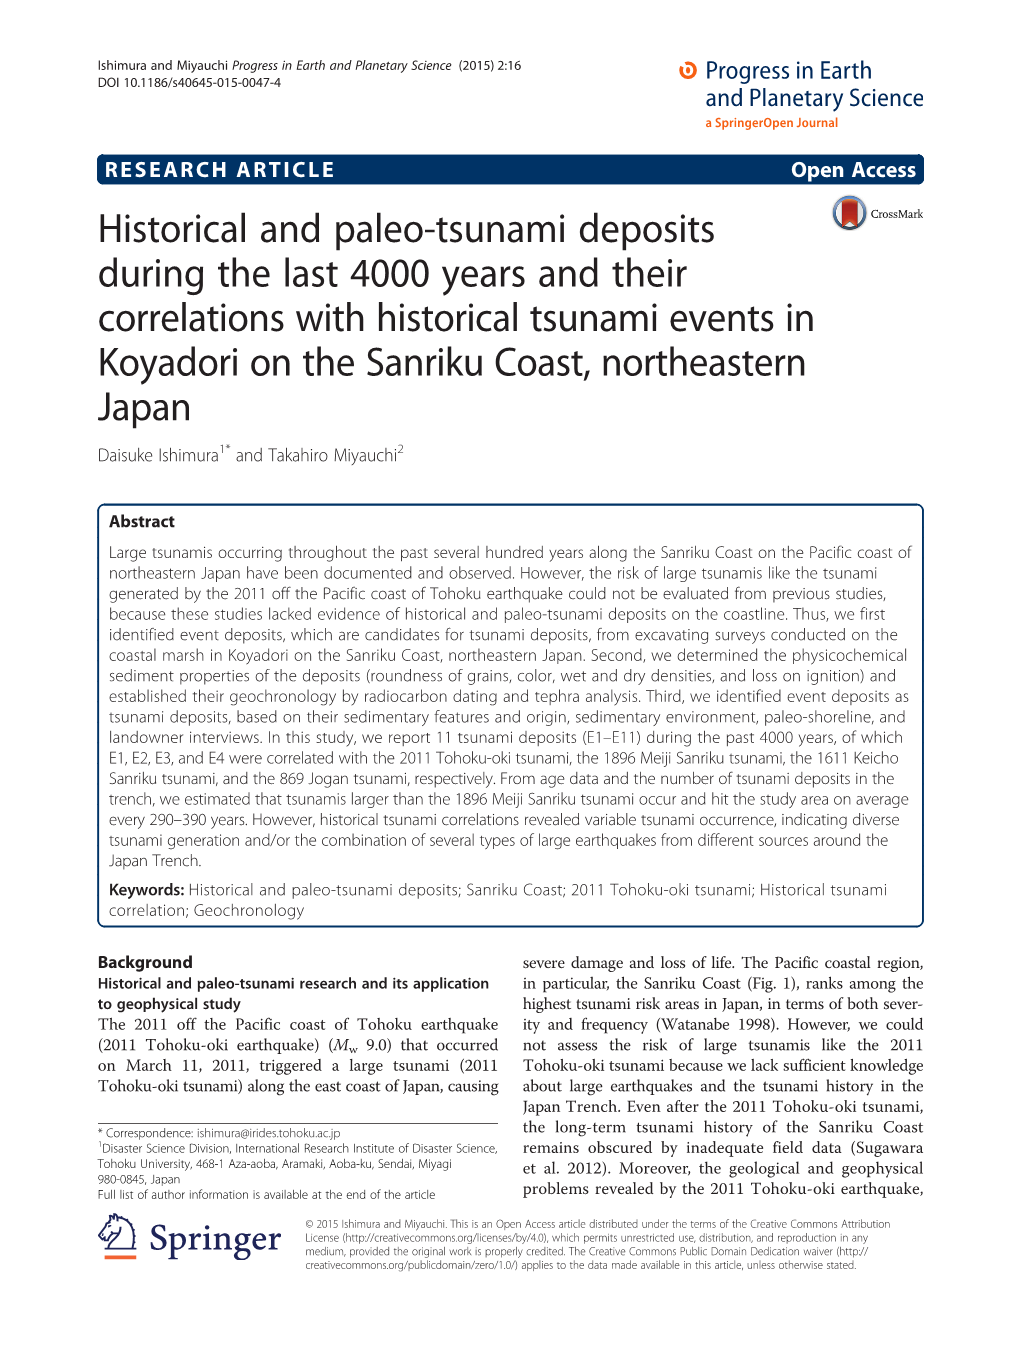 Historical and Paleo-Tsunami Deposits During the Last 4000 Years and Their